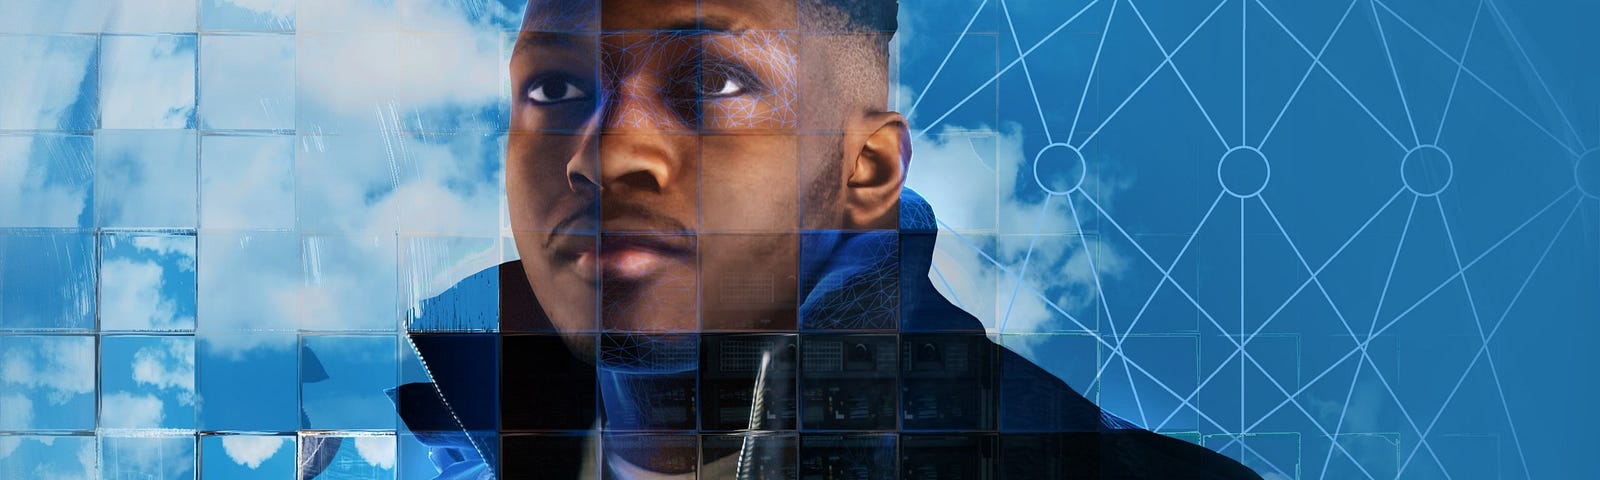 This image shows a young black man wearing a black coat staring past the camera in front of a blue cloudy sky. The scene is refracted in different ways by a fragmented glass grid. This grid is a visual metaphor for the way that new artificial intelligence (AI) and machine learning technologies can be used to extract and analyse behavioural and demographic data in innovative ways.